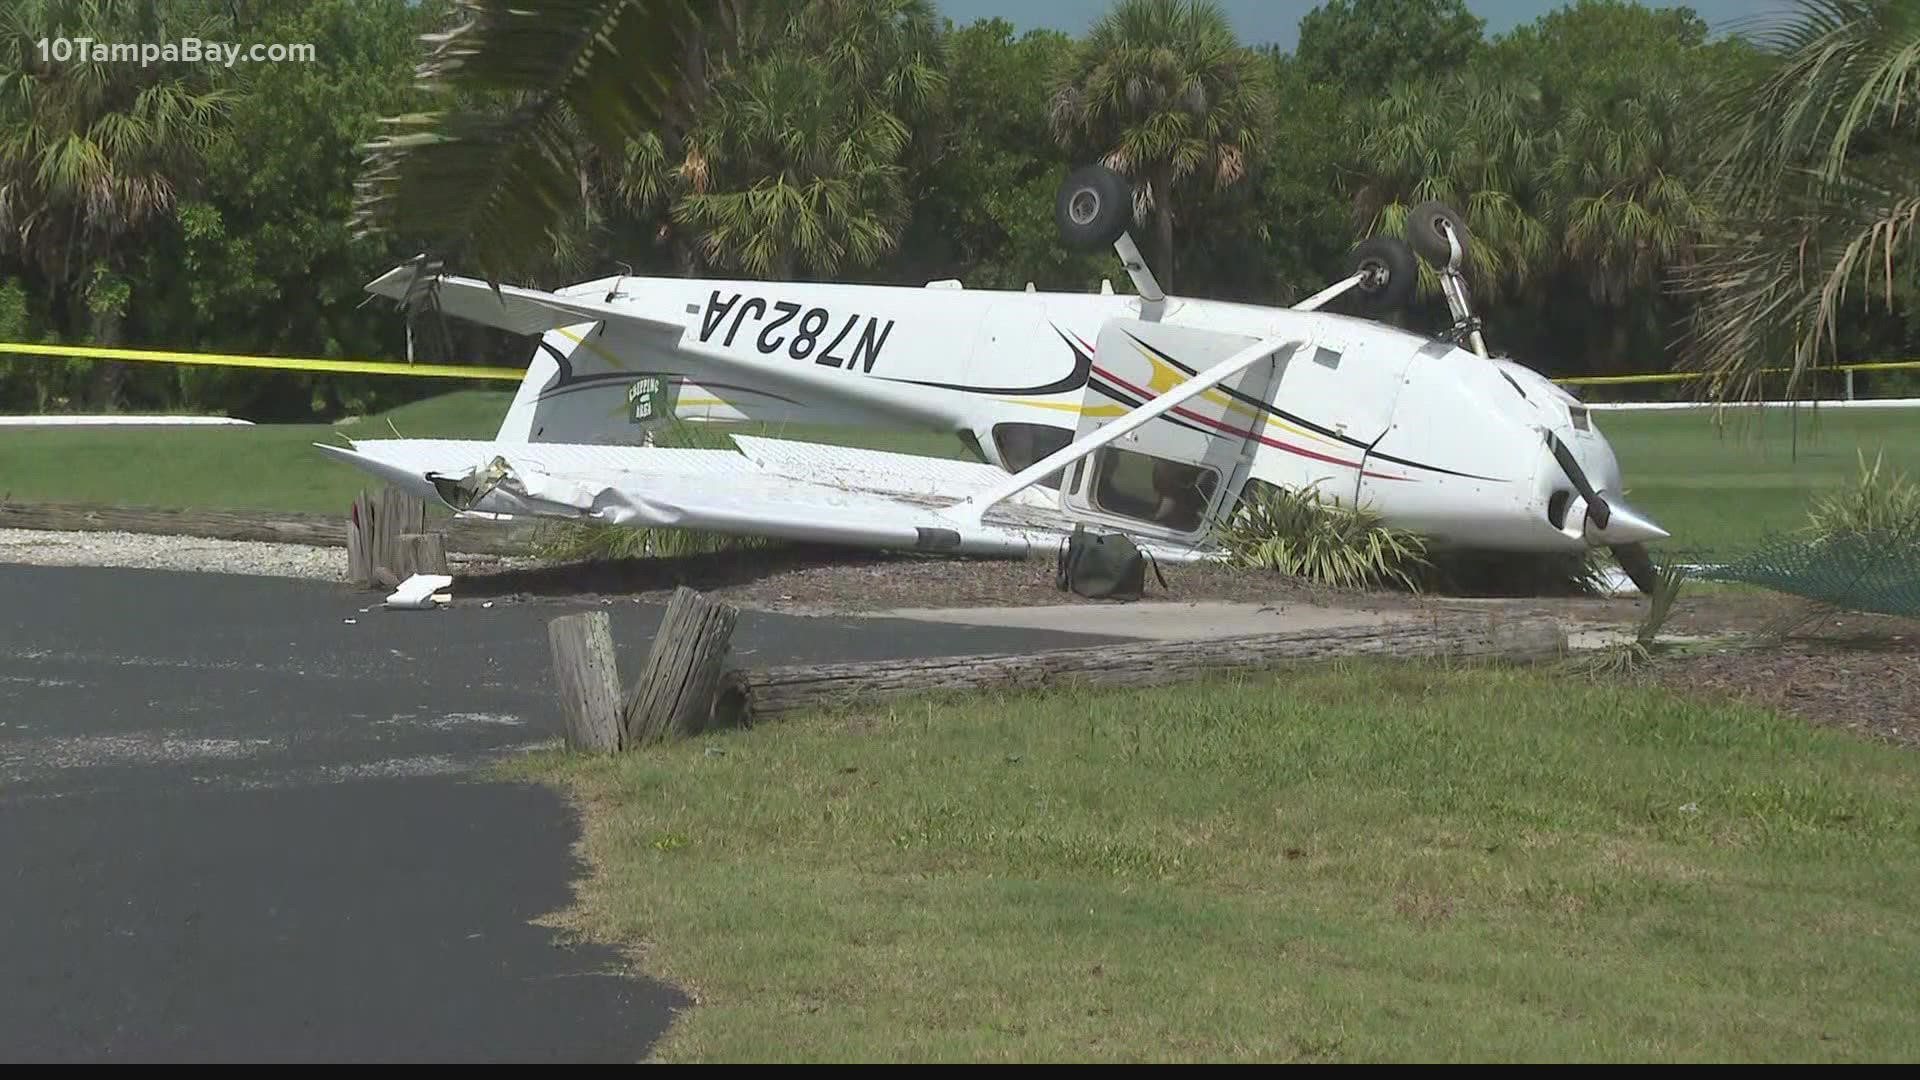 The plane's pilot and passenger were not hurt, an official said.